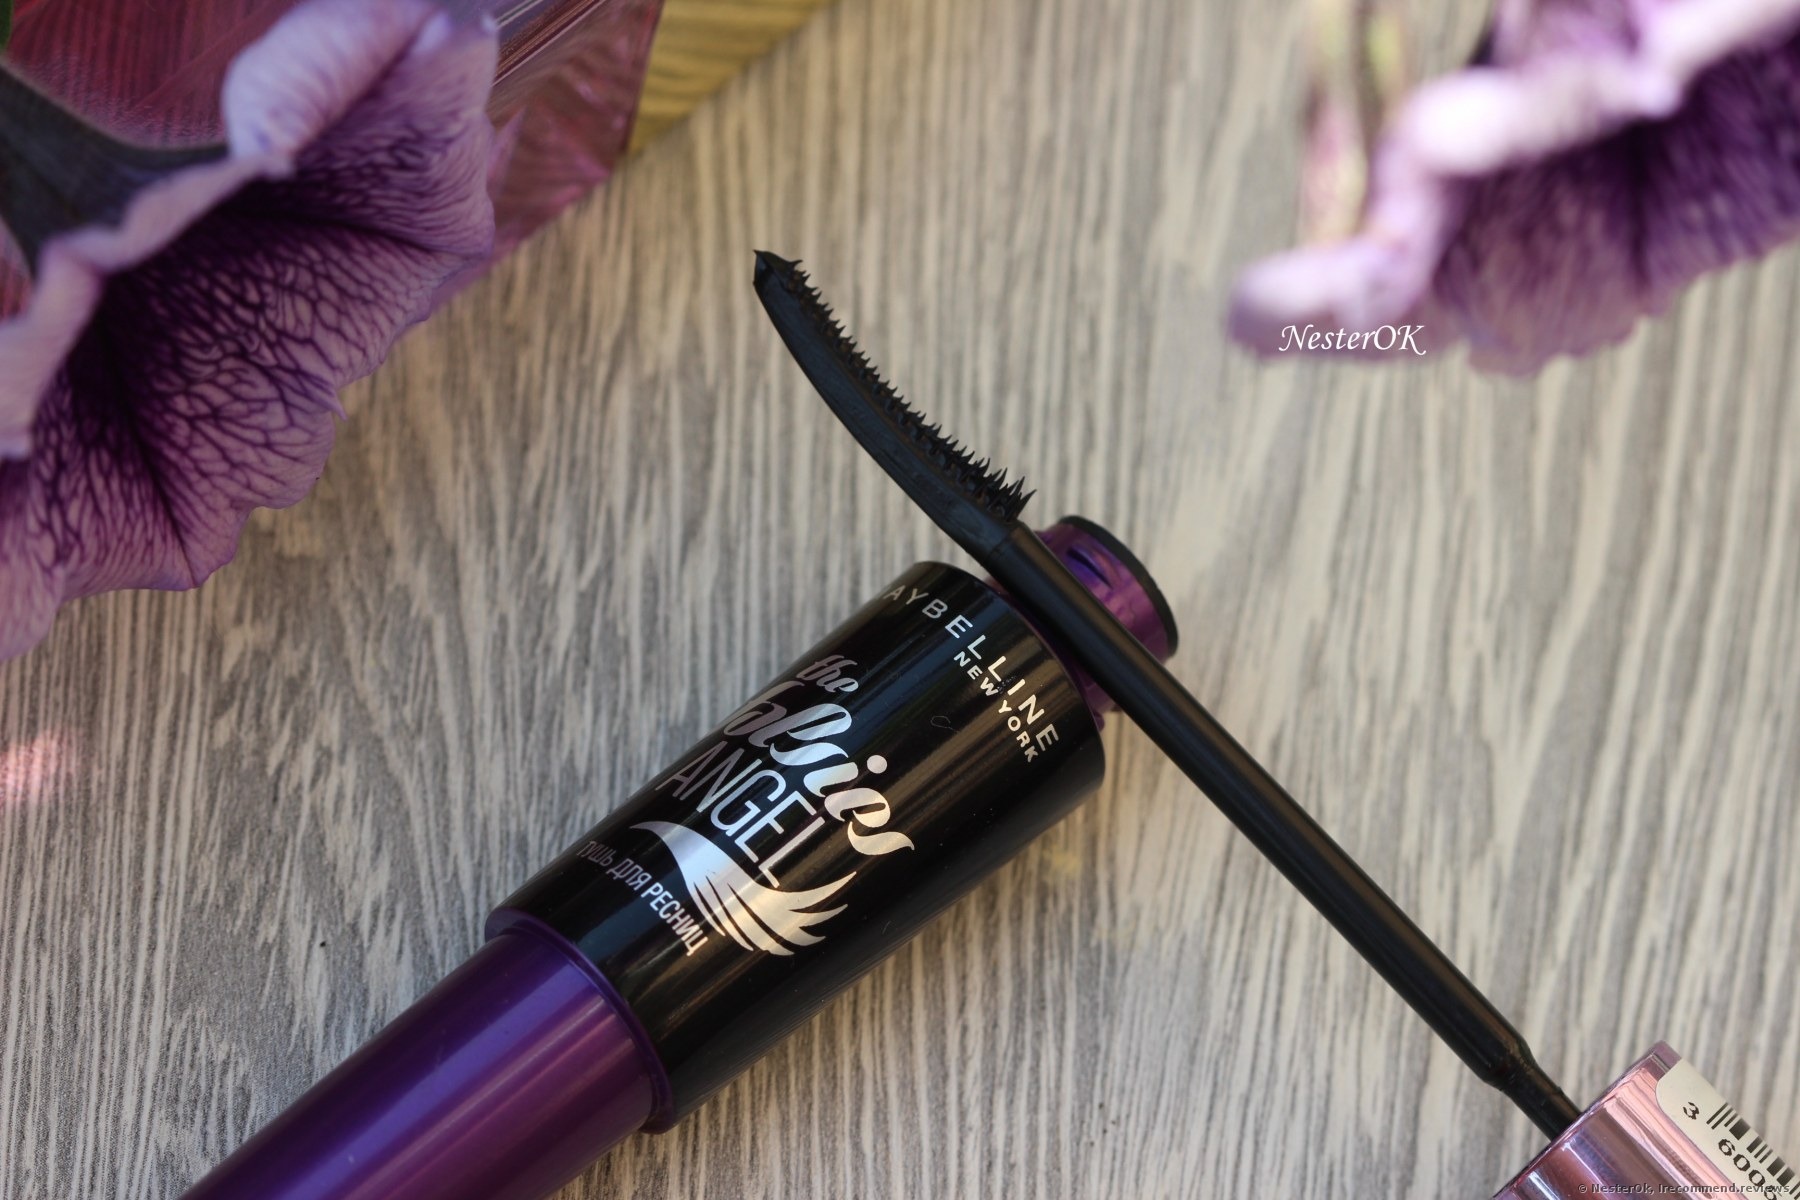 Maybelline The Falsies Push Up Angel Mascara Review - Before & After